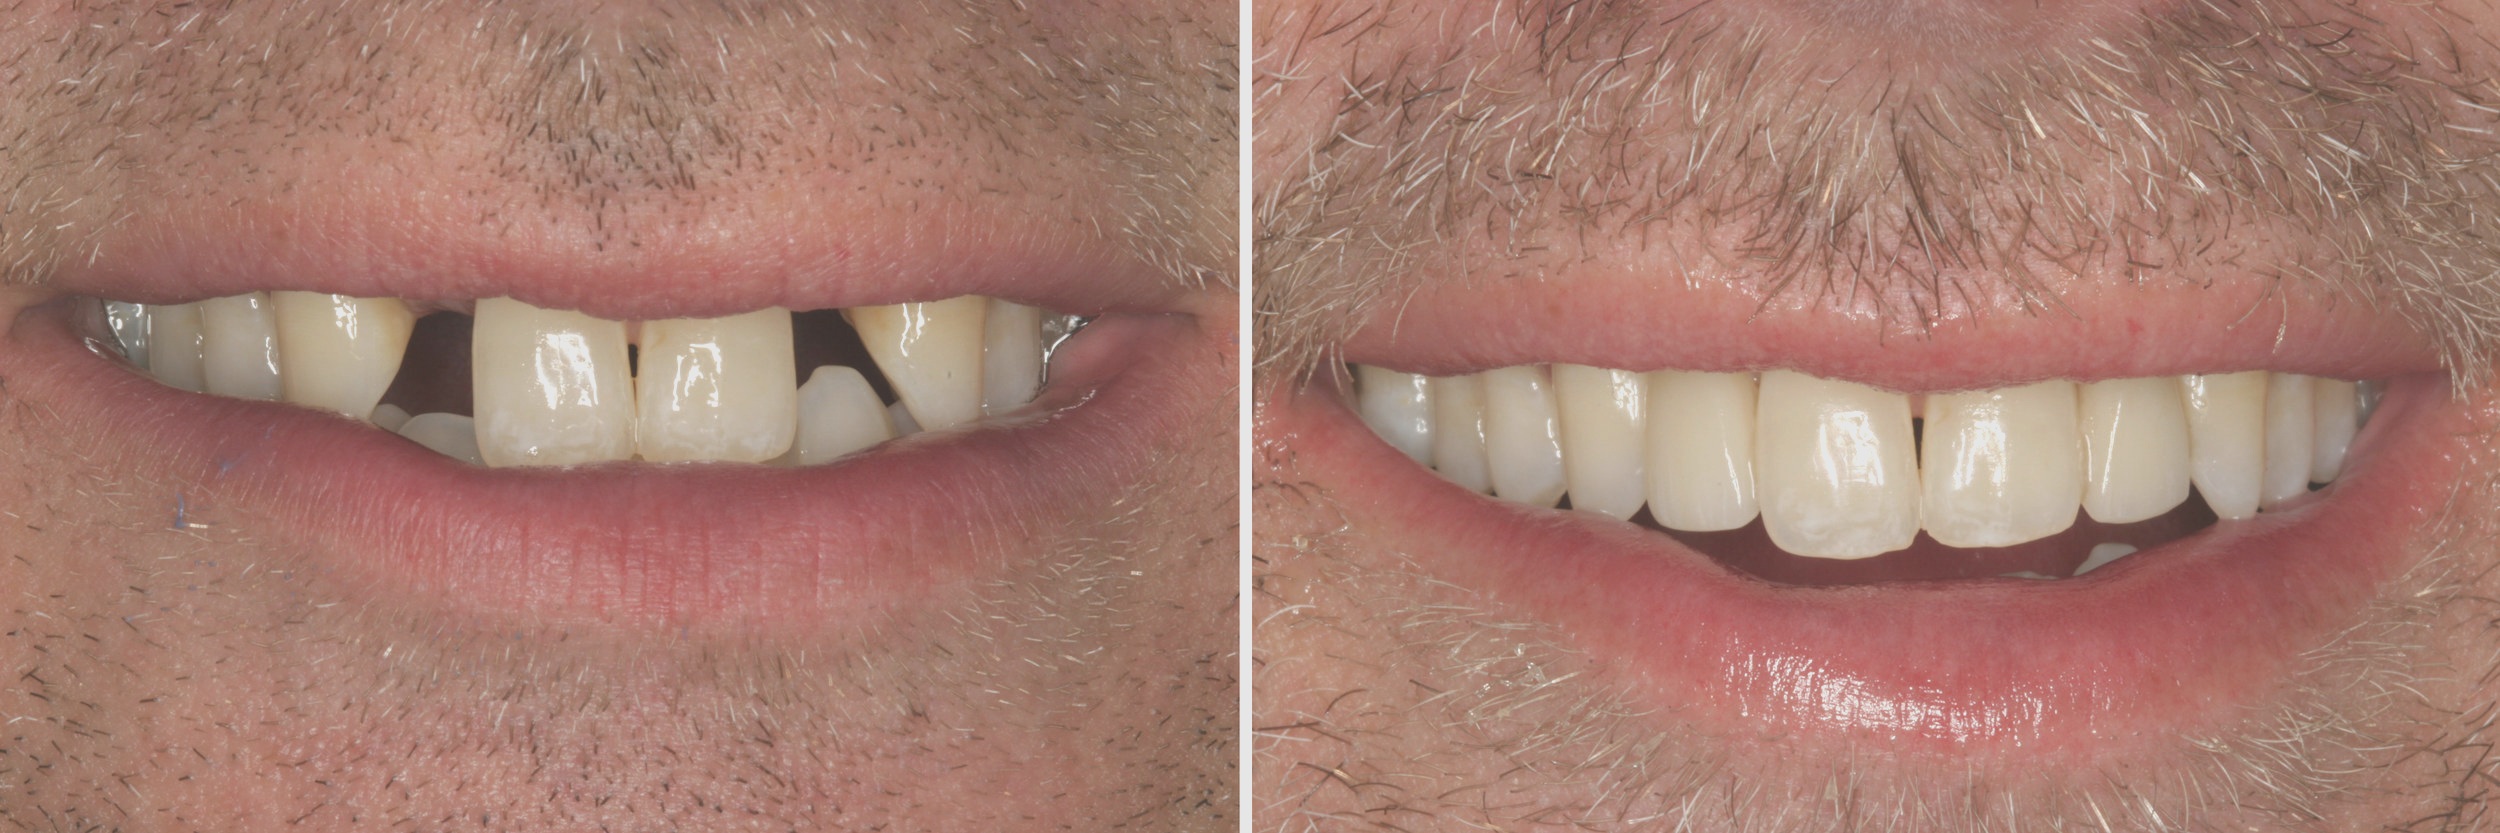 Before and After: Veneers